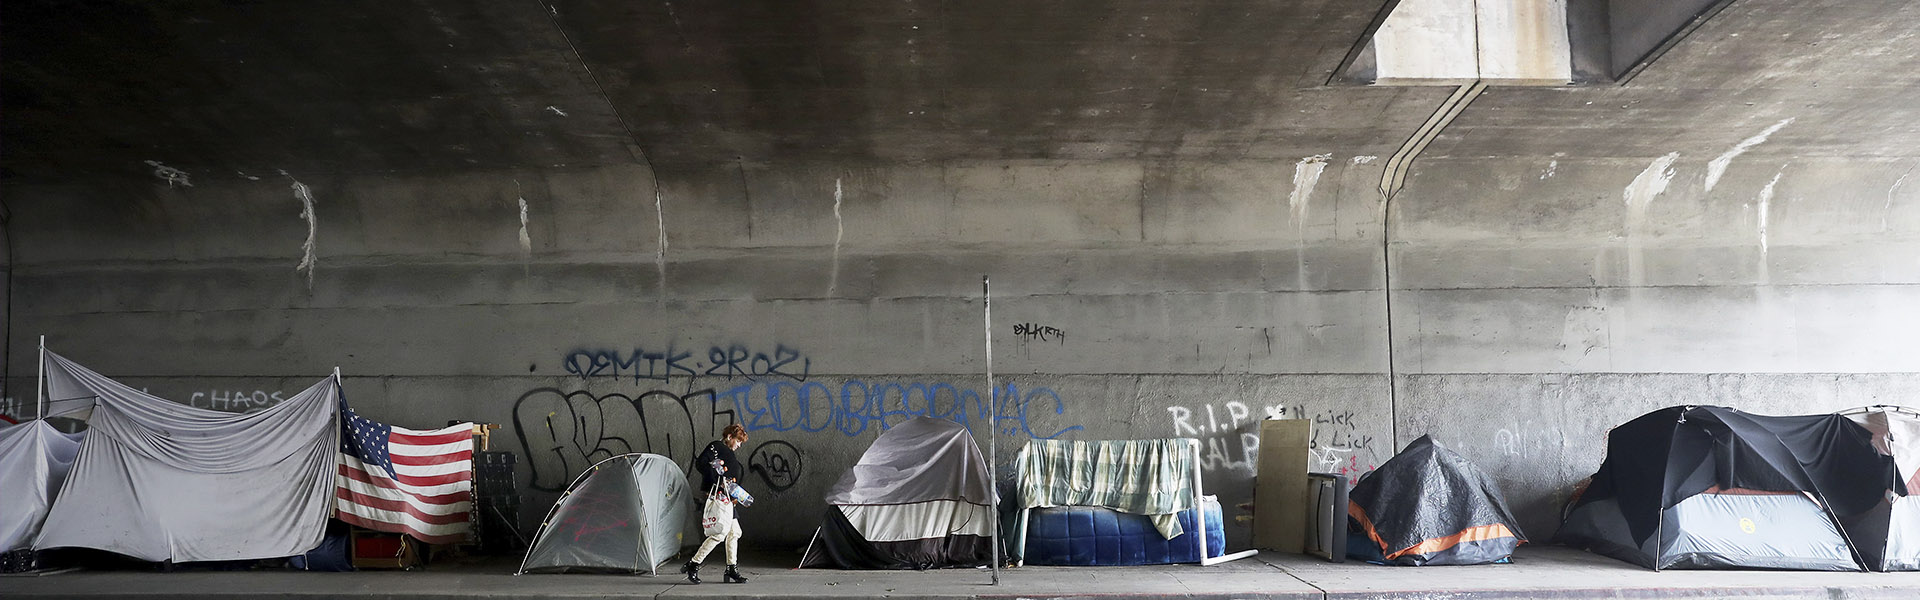 history on homelessness in america